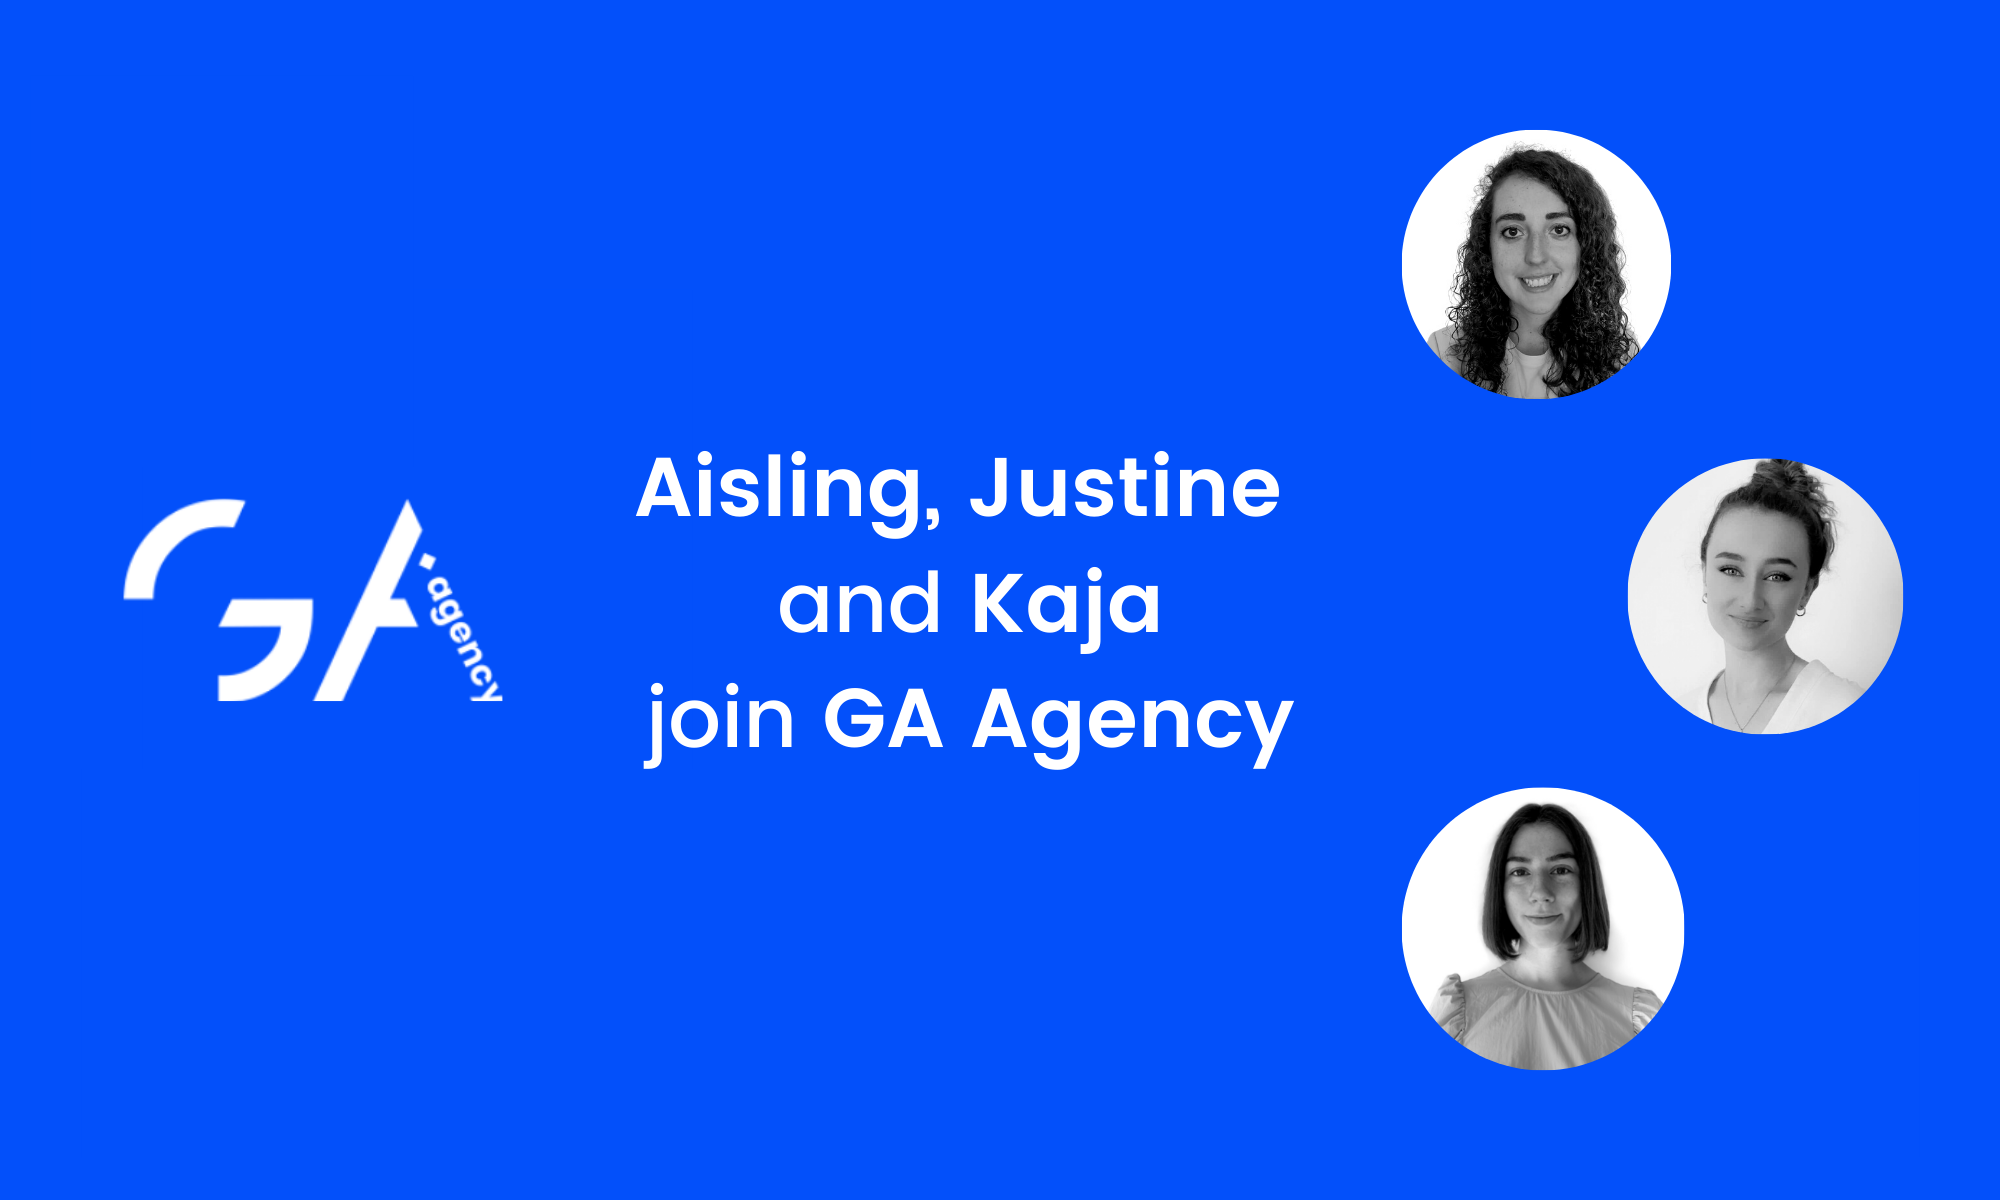 Aisling, Justine and Kaja have joined GA Agency 